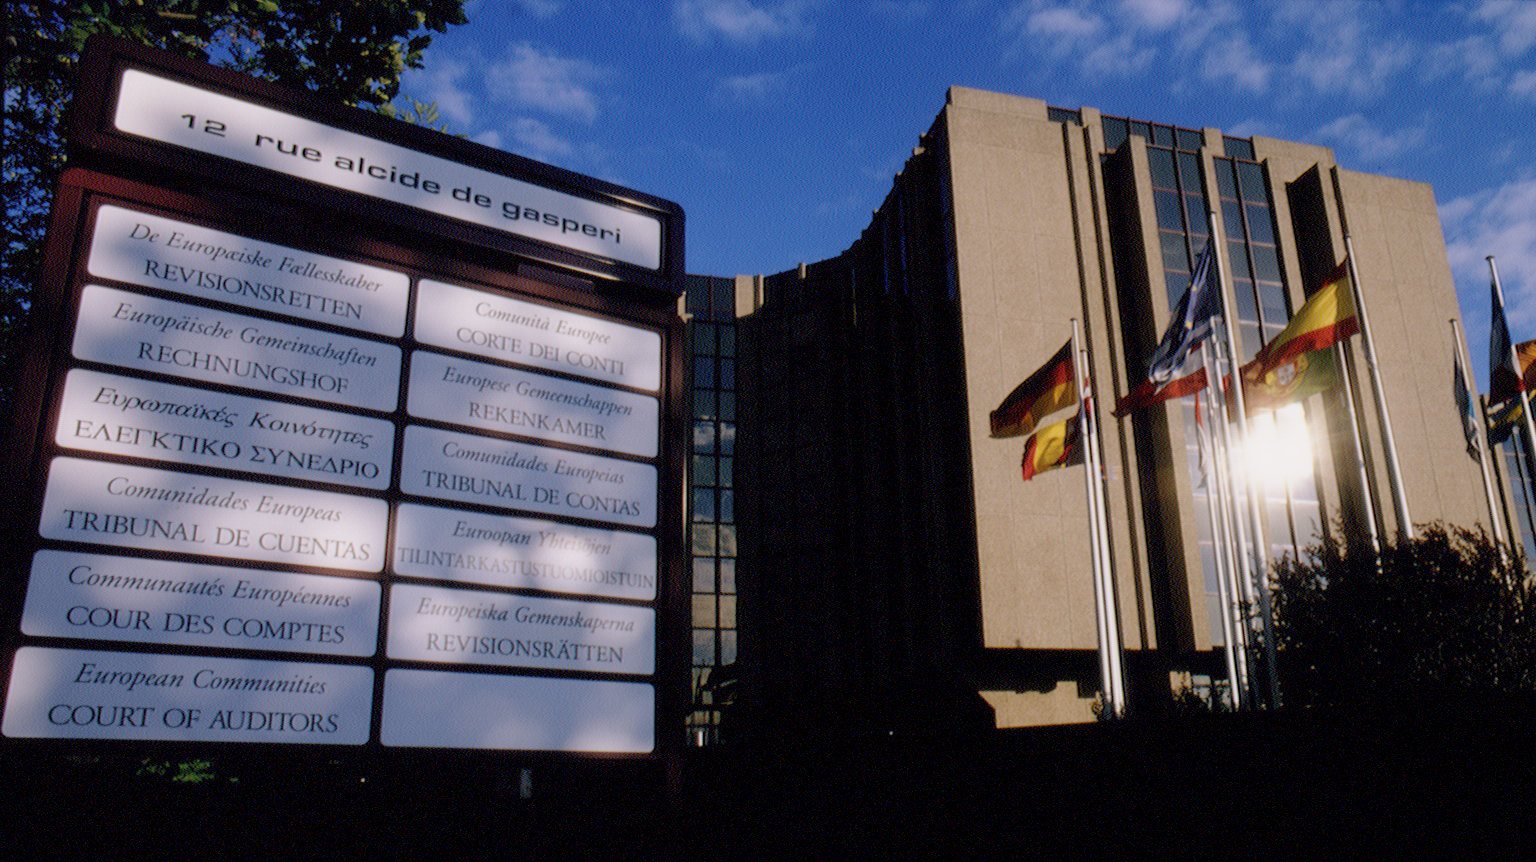 THE EUROPEAN COURT OF AUDITORS IN LUXEMBOURG